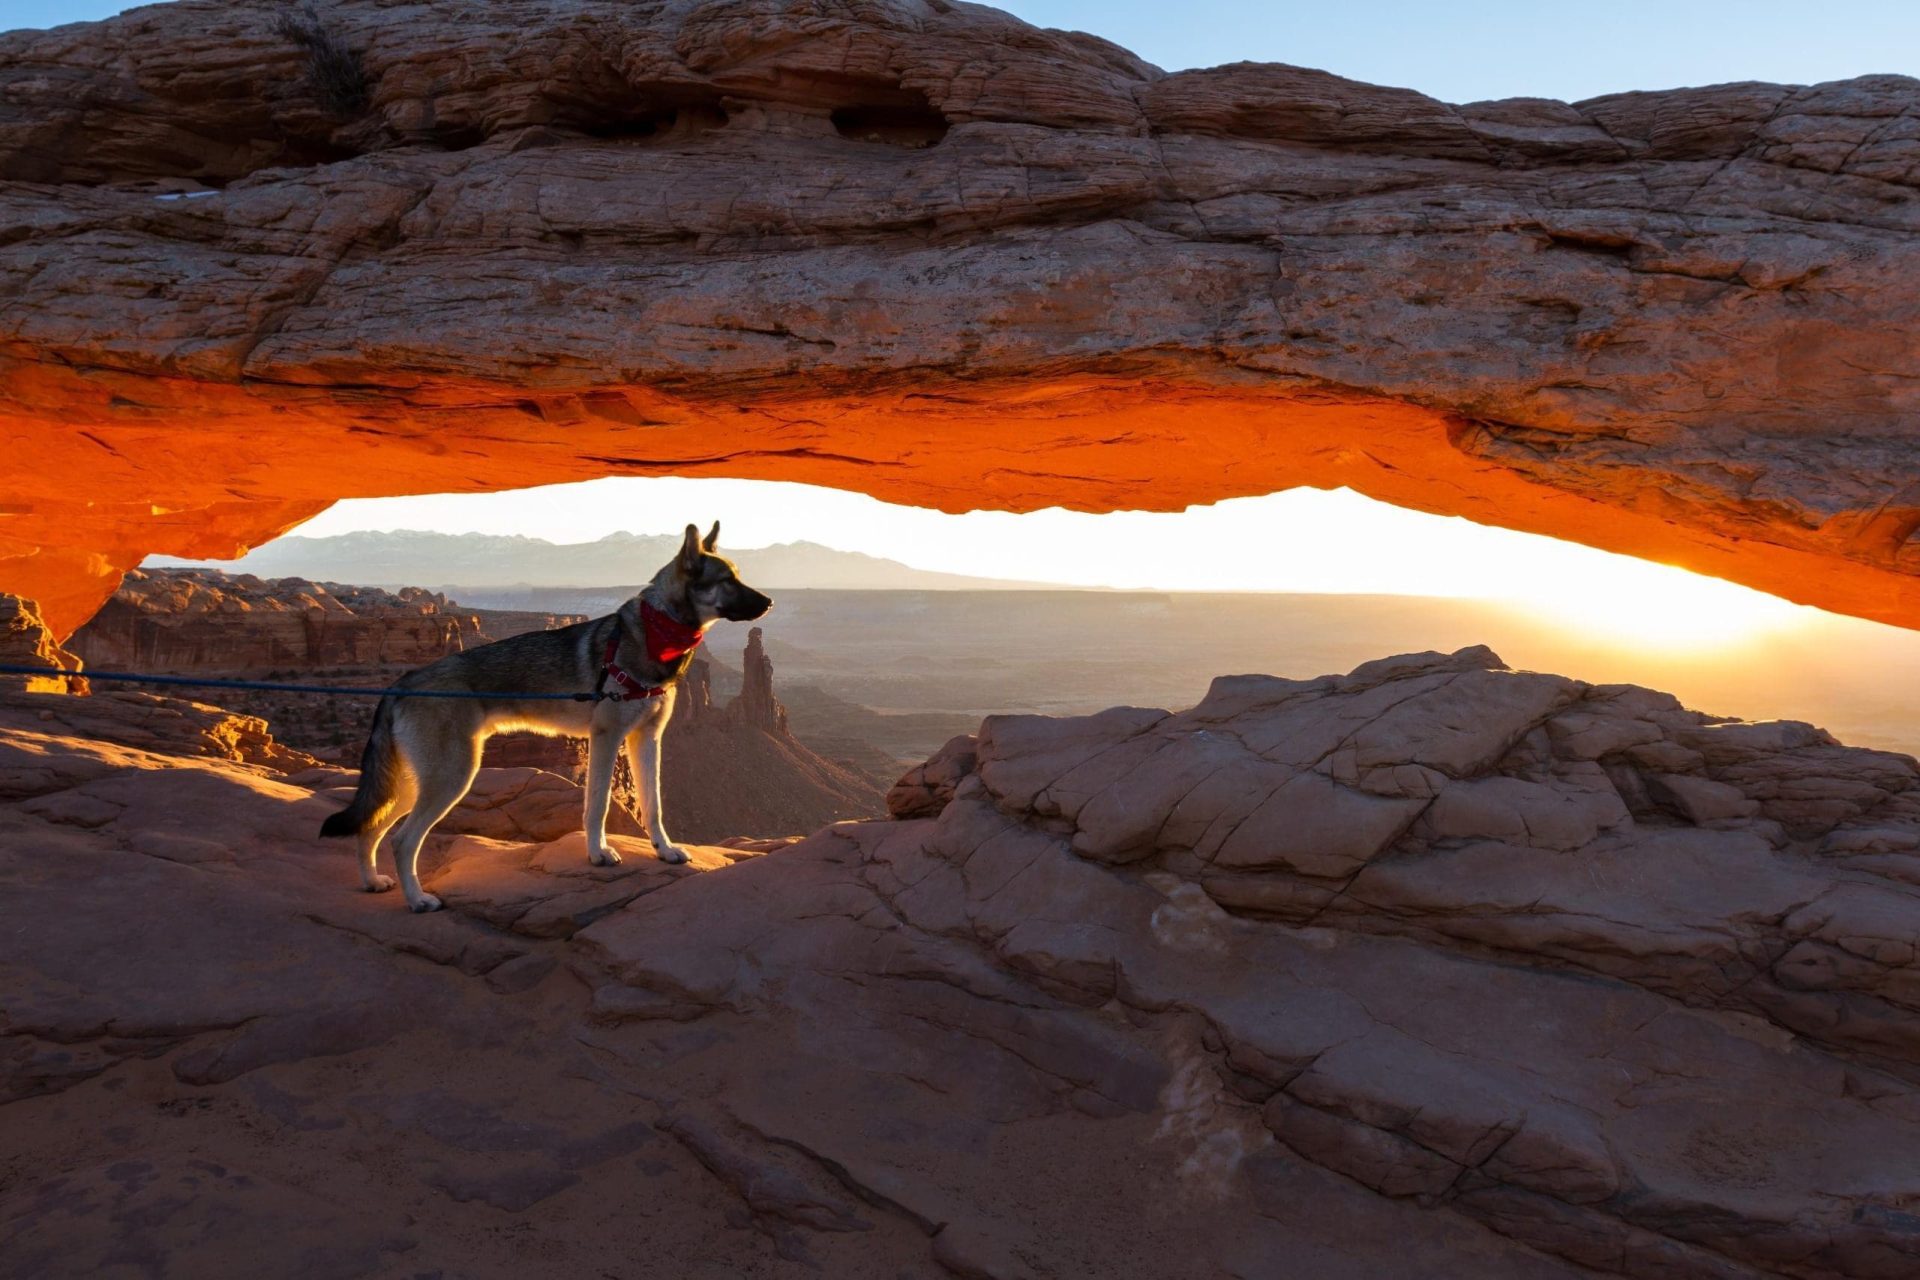 Are Dogs Allowed in Canyonlands?